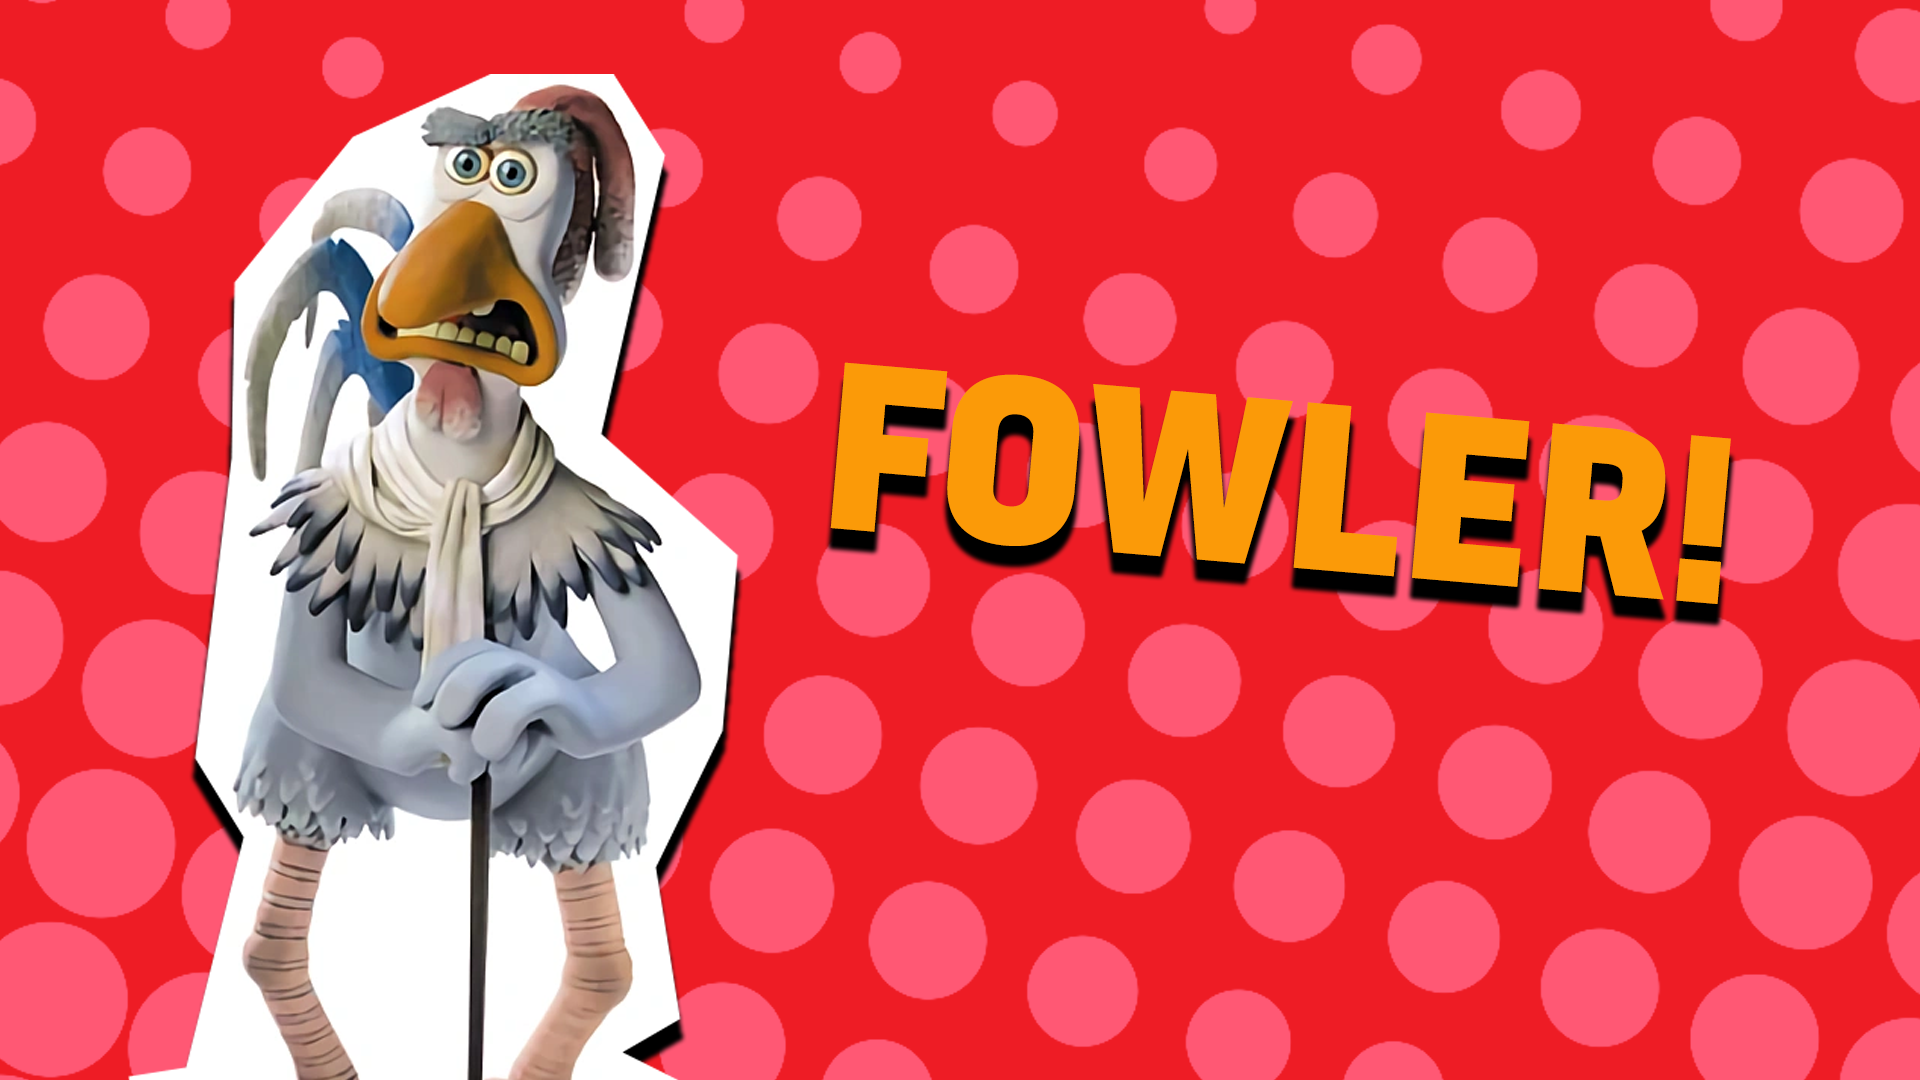  You're Fowler! You believe in sticking to routine and have a tendency to do on about the 'good old days'! You like taking charge, but that doesn't mean anyone will listen to you!